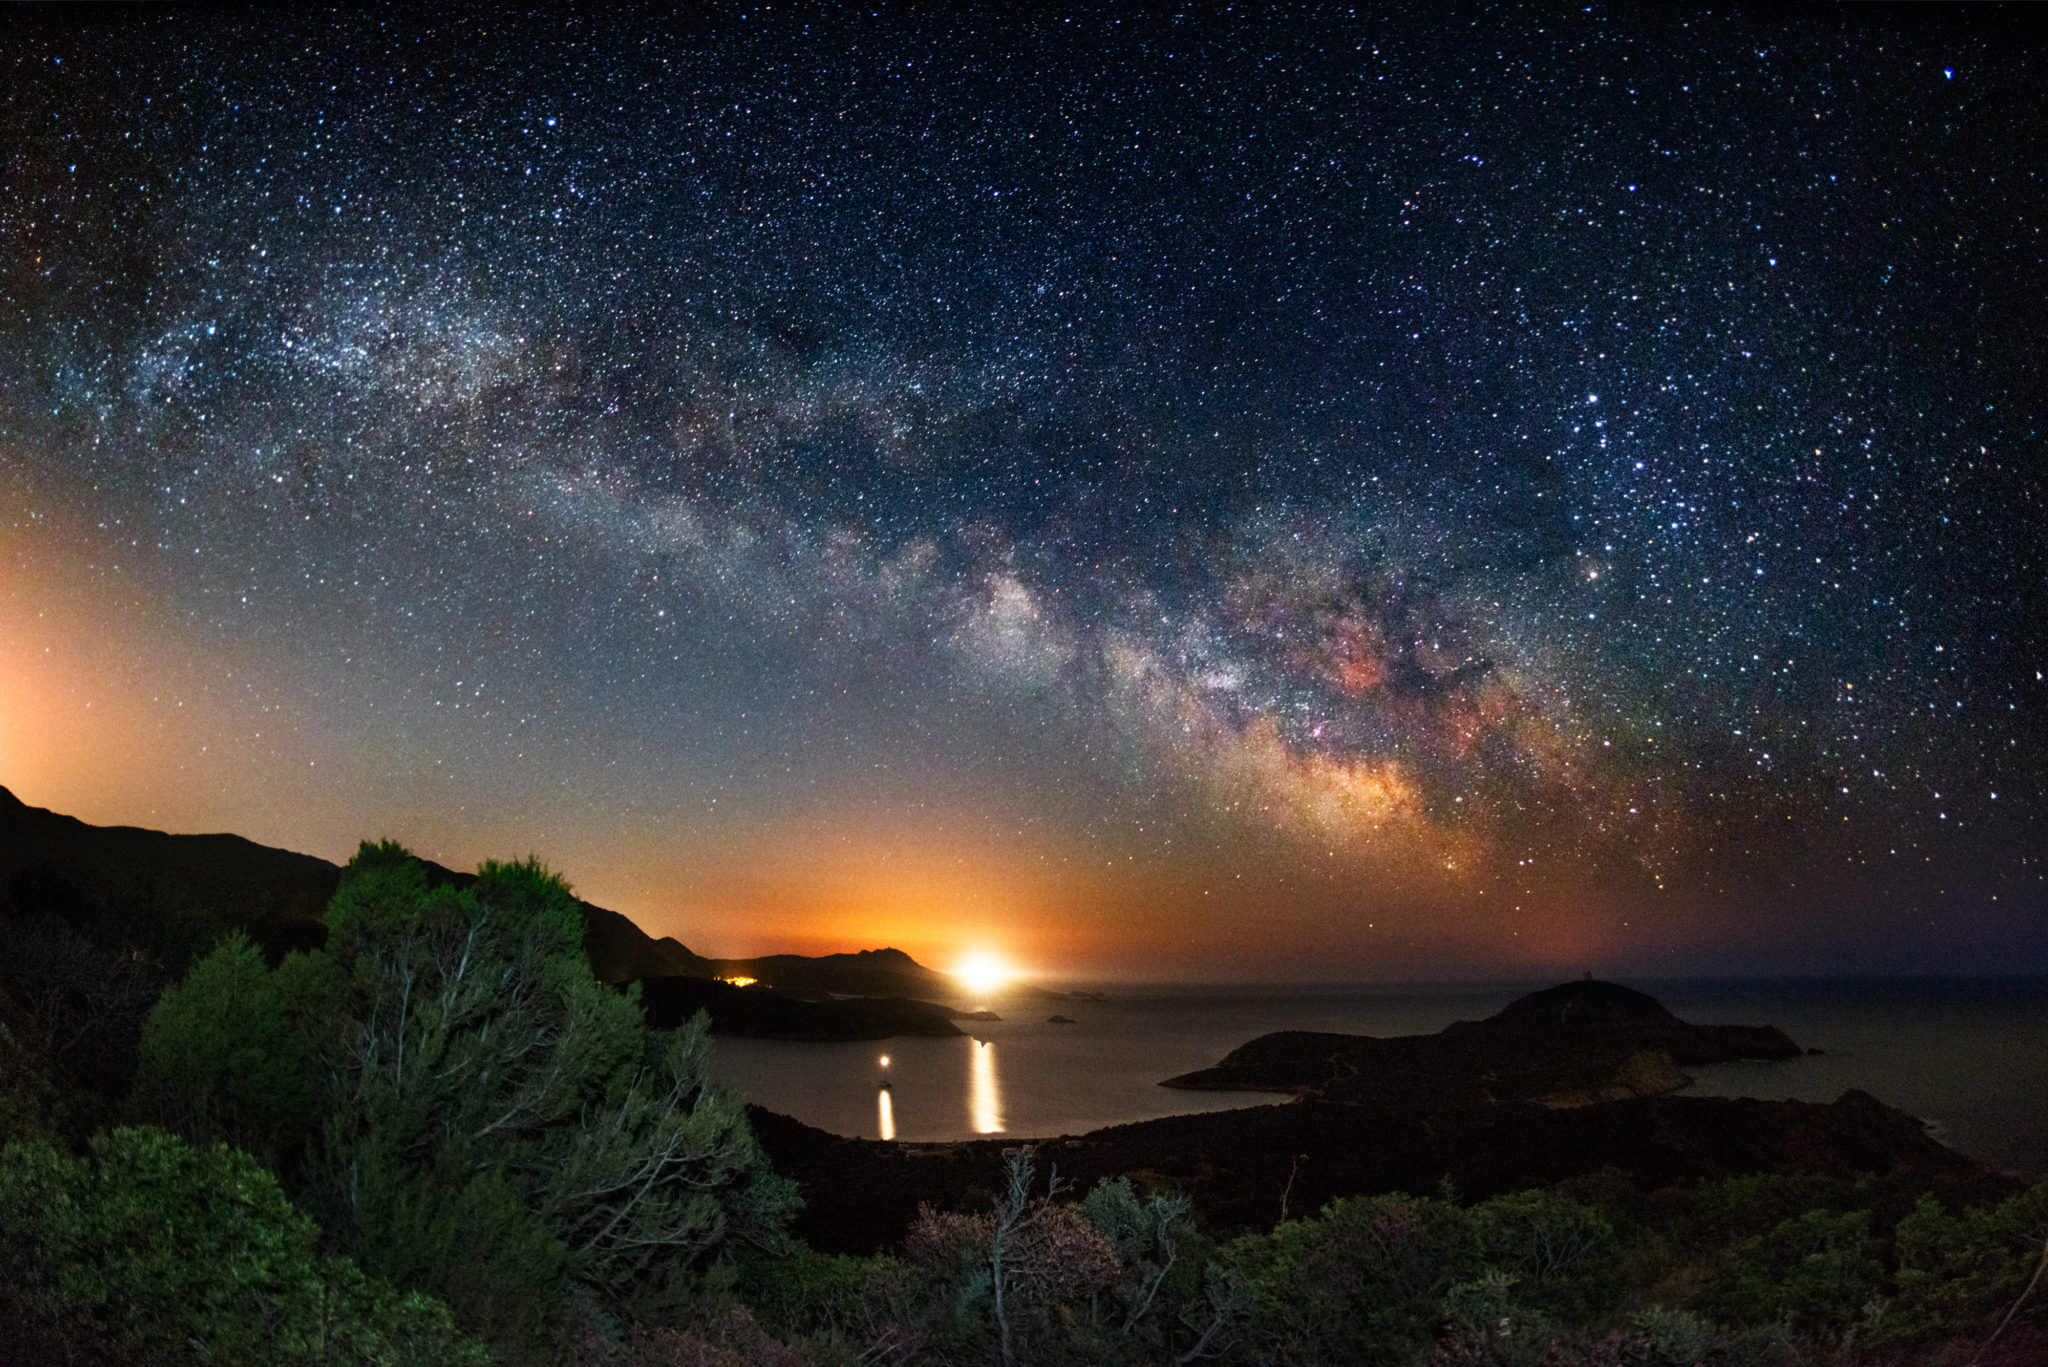 Milky way on over the Malfatano Cape - very low noise fot this type of pictures